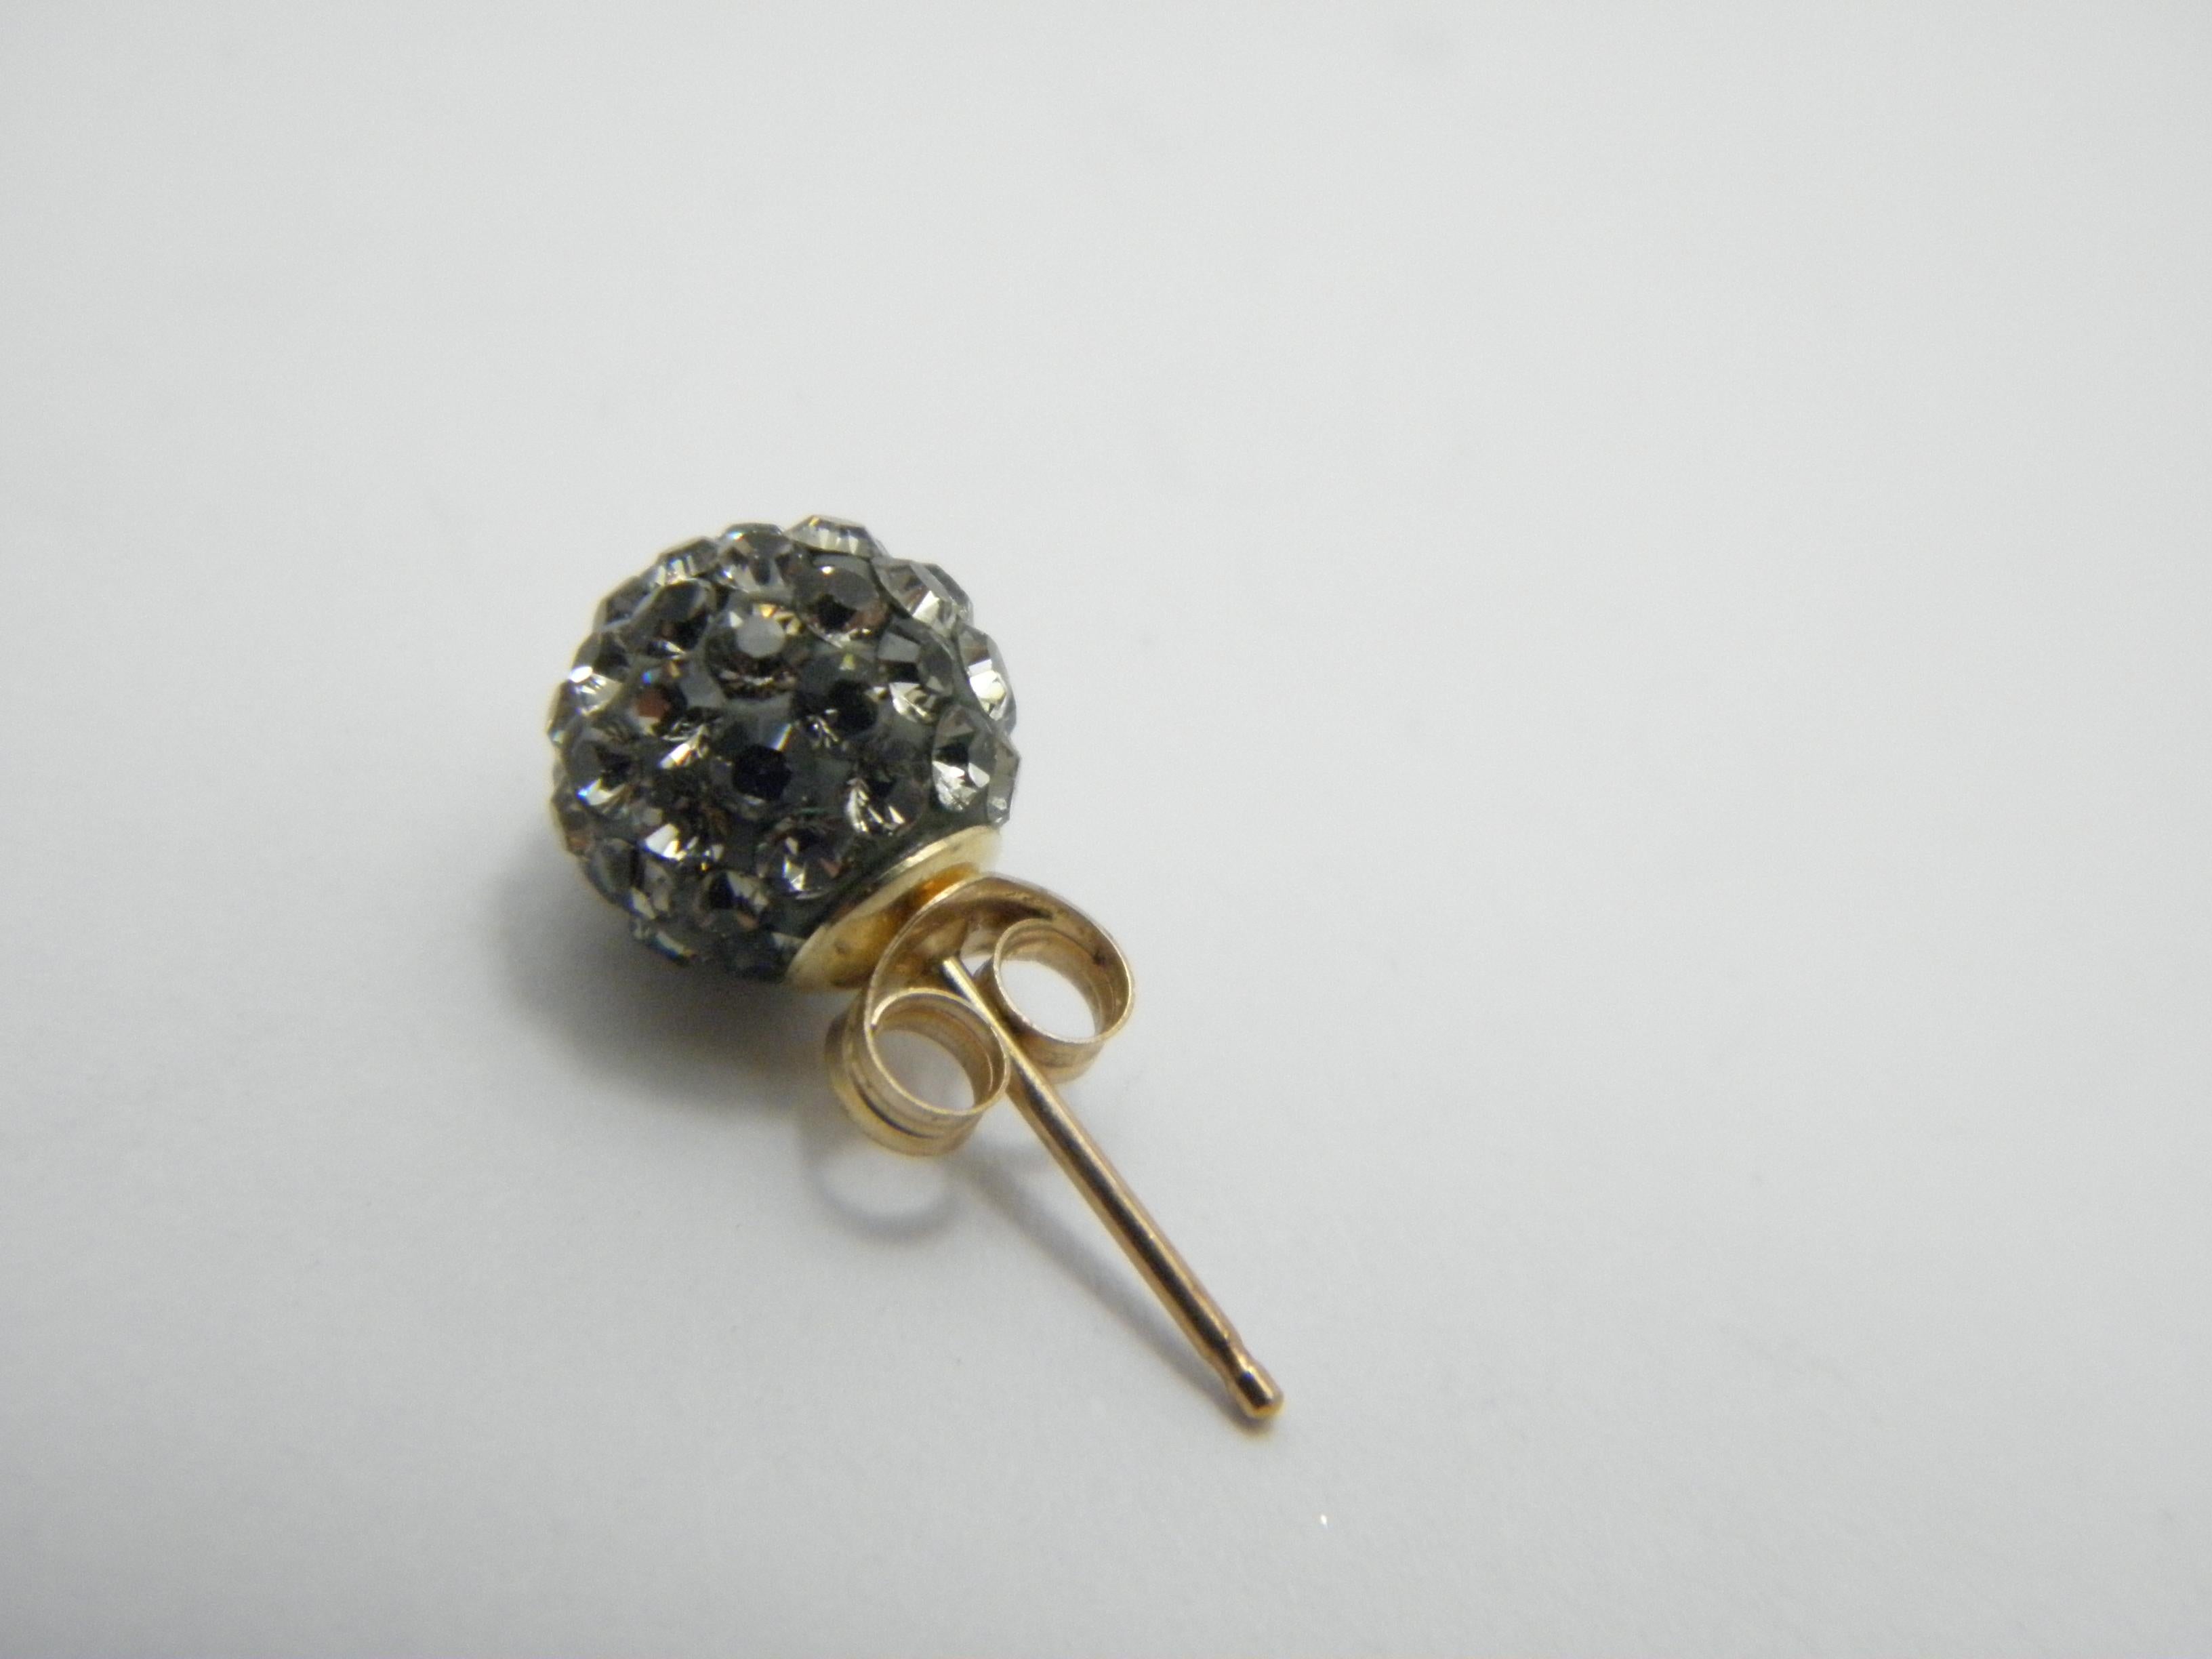 Vintage 9ct Gold Large Glitter Ball Crystal Stud Earrings 375 Purity VGC In Good Condition For Sale In Camelford, GB